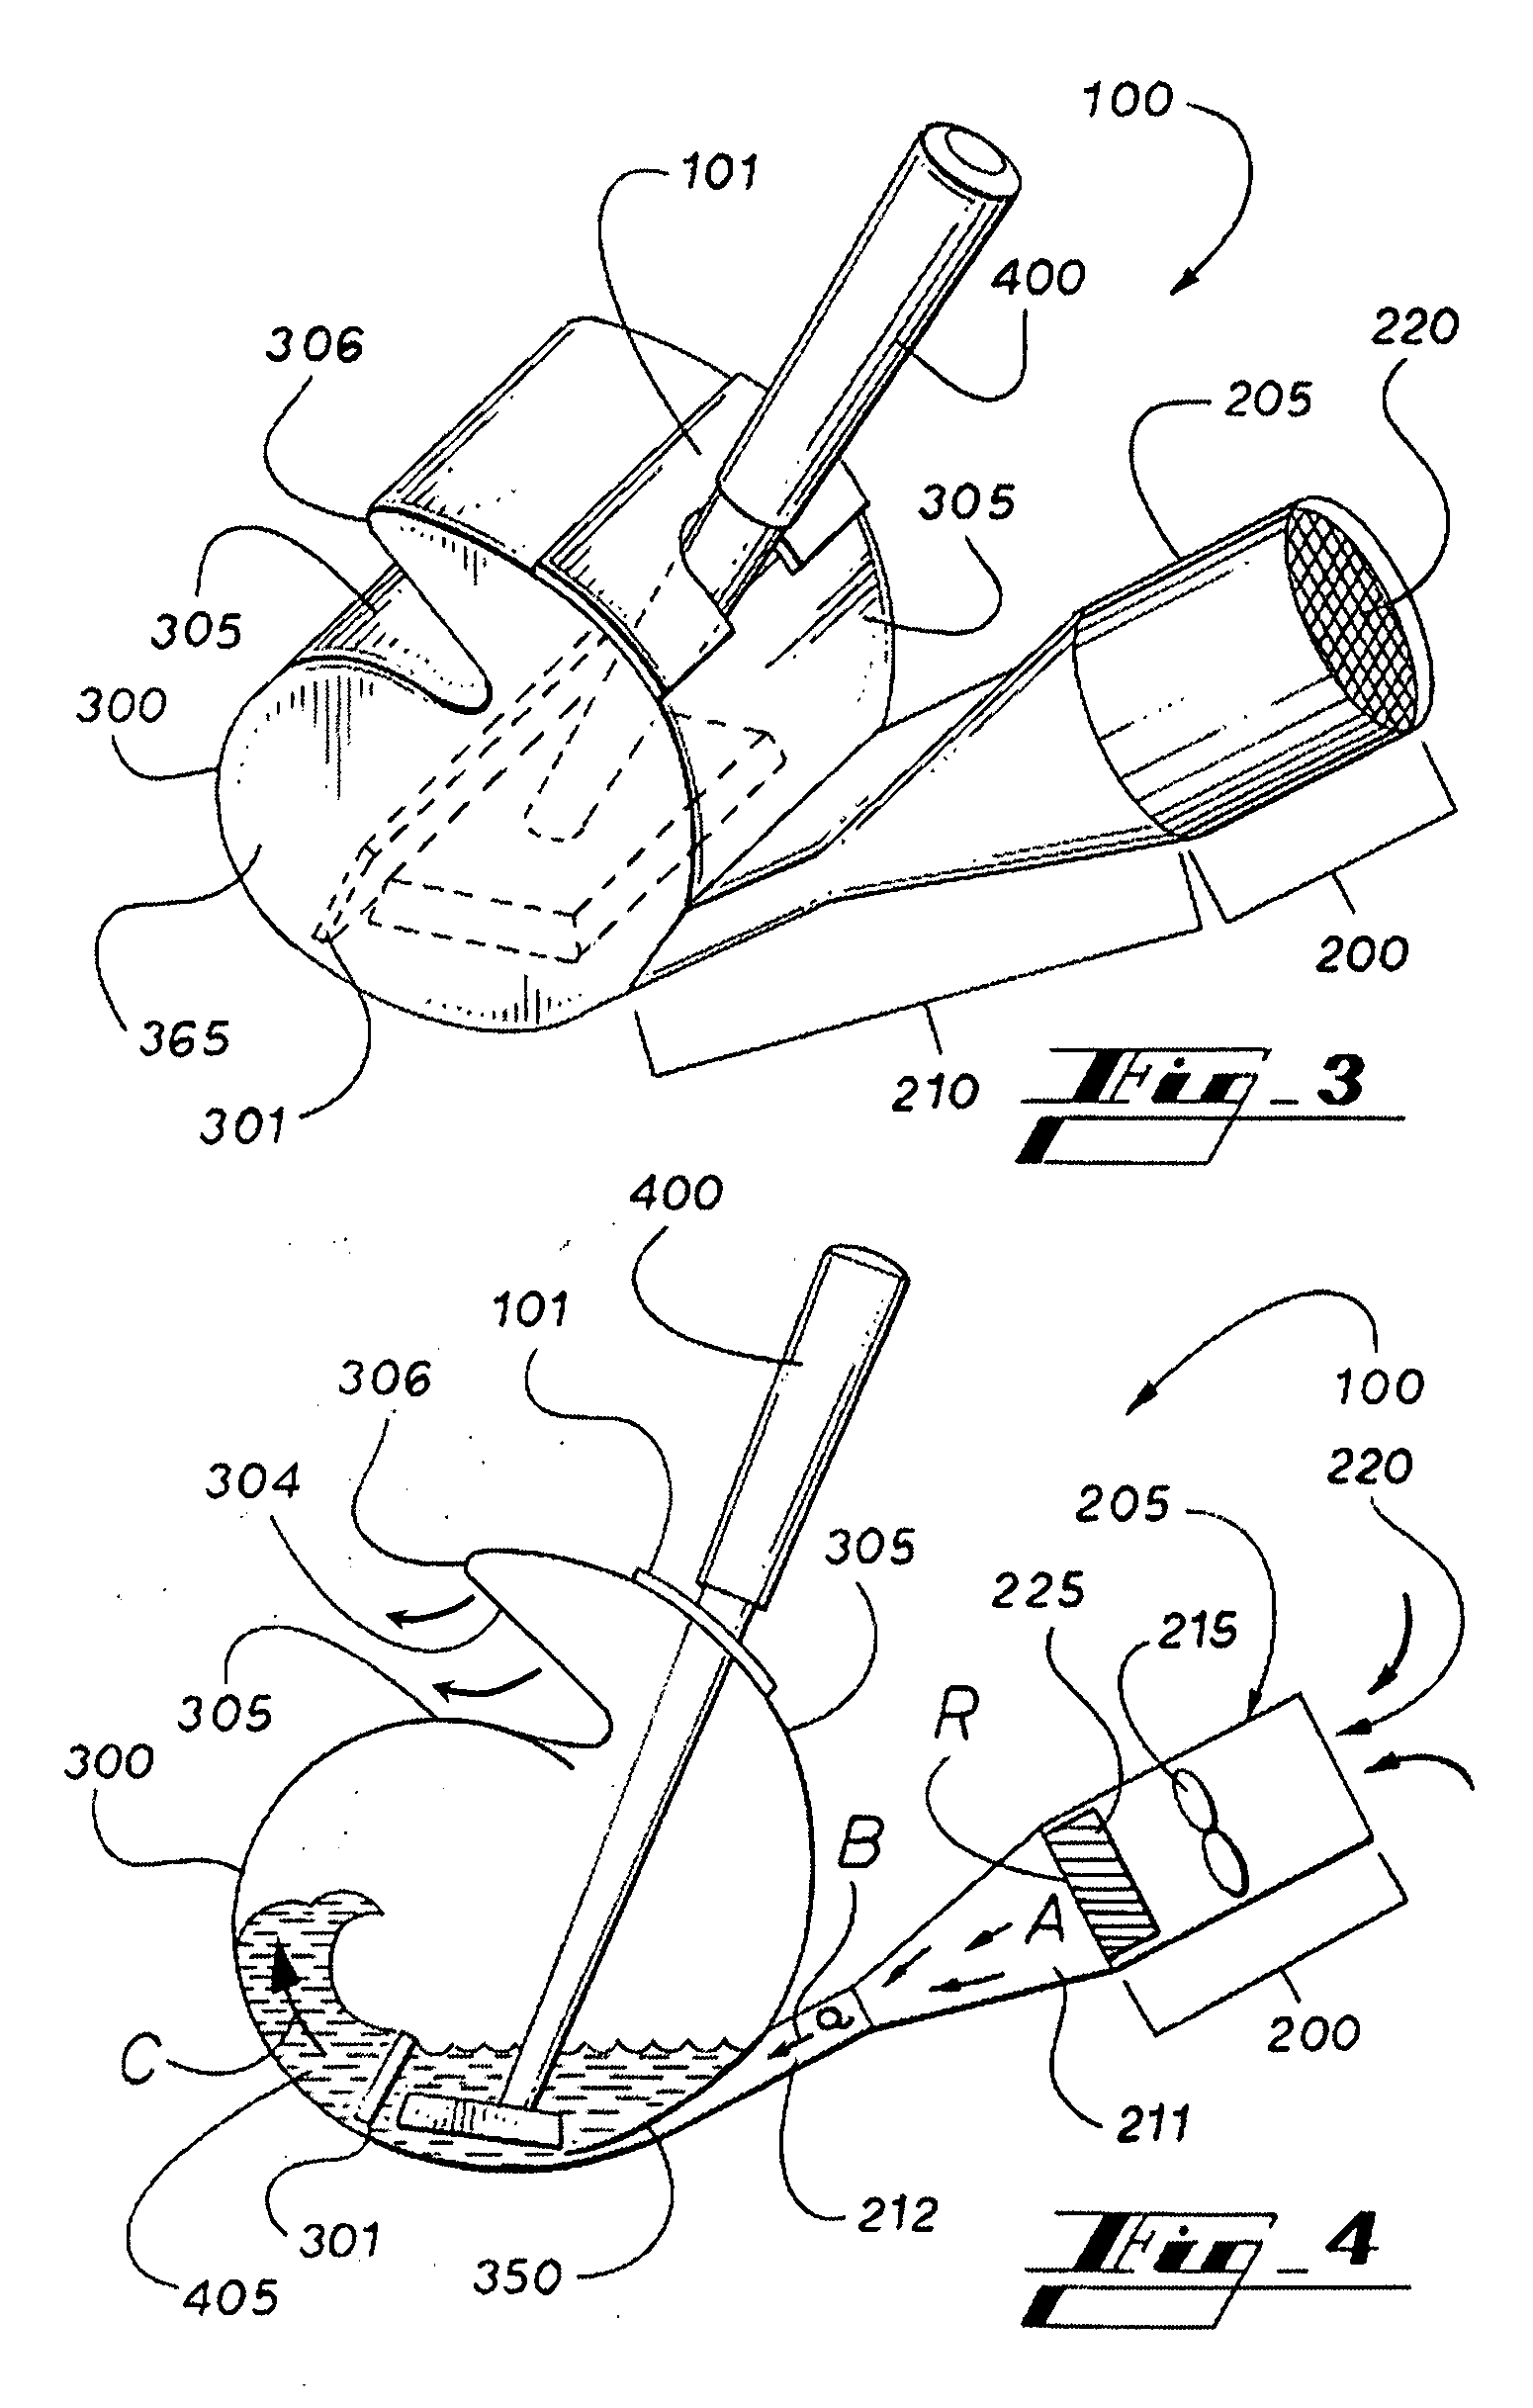 Cleaning and drying system for a personal hygiene device